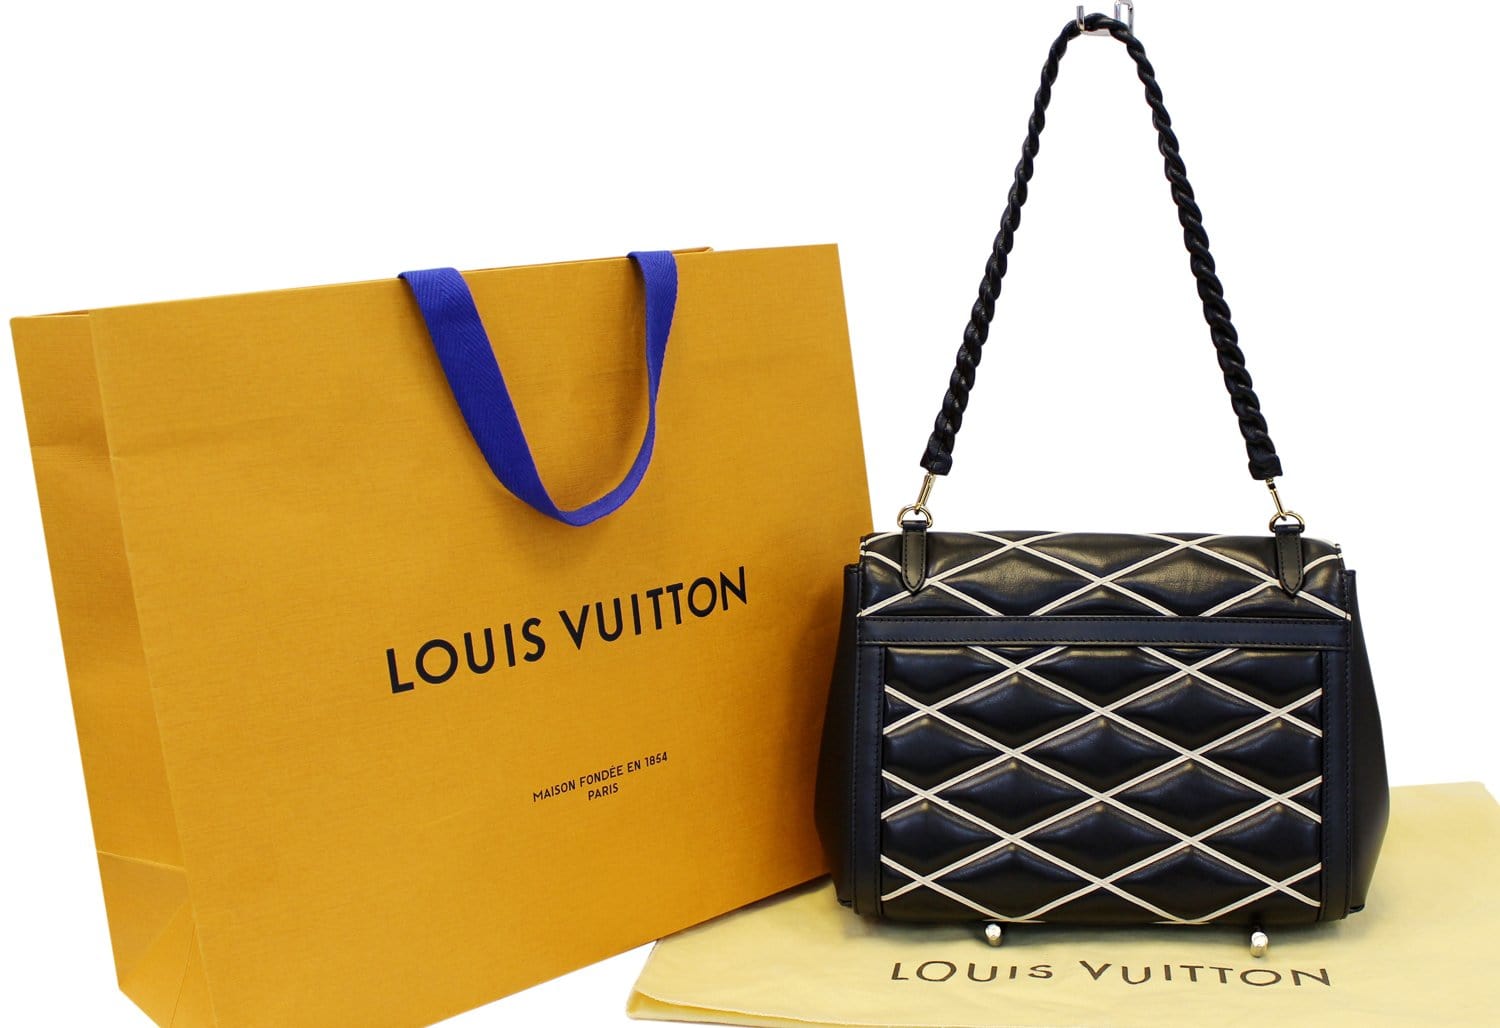 Louis Vuitton Malletage Handbag in Black and White Quilted Leather